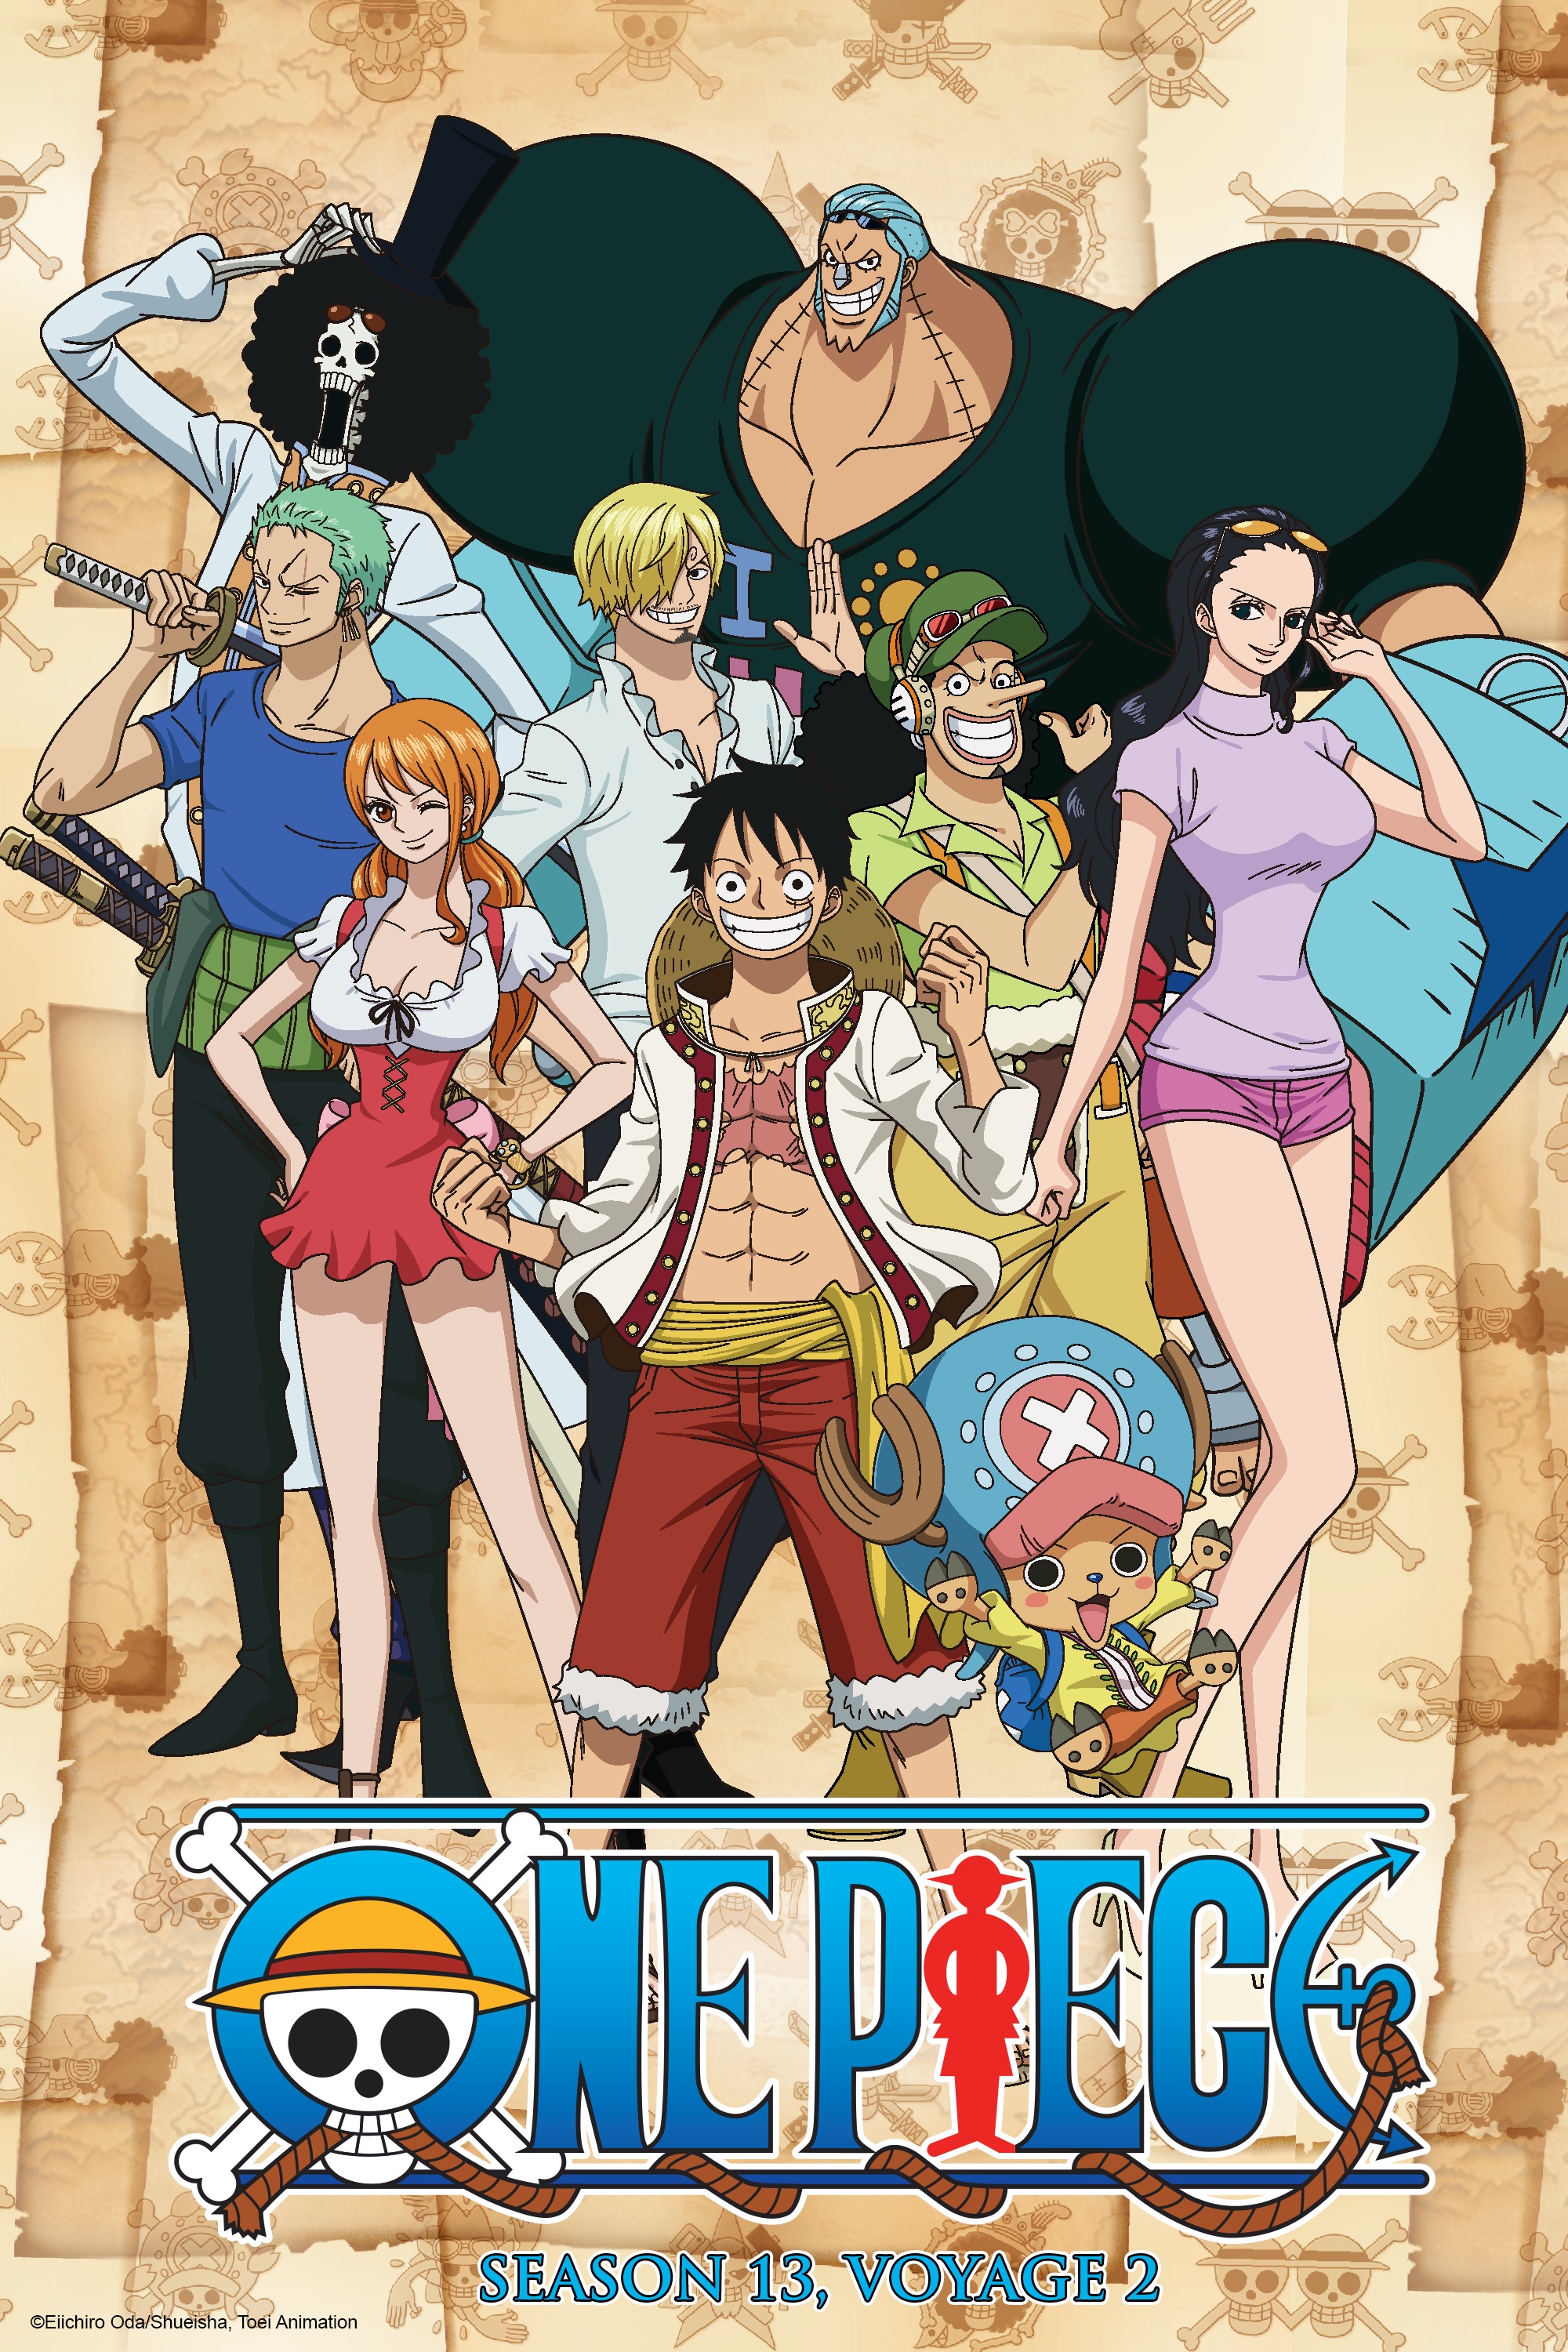 One Piece Into Sweet City The Crew Finally Meets Big Mom S Crew One Piece Season 13 Voyage 2 Eps 795 806 Is Now Available In Digital Storefronts T Co I8tmj1wjsm Twitter